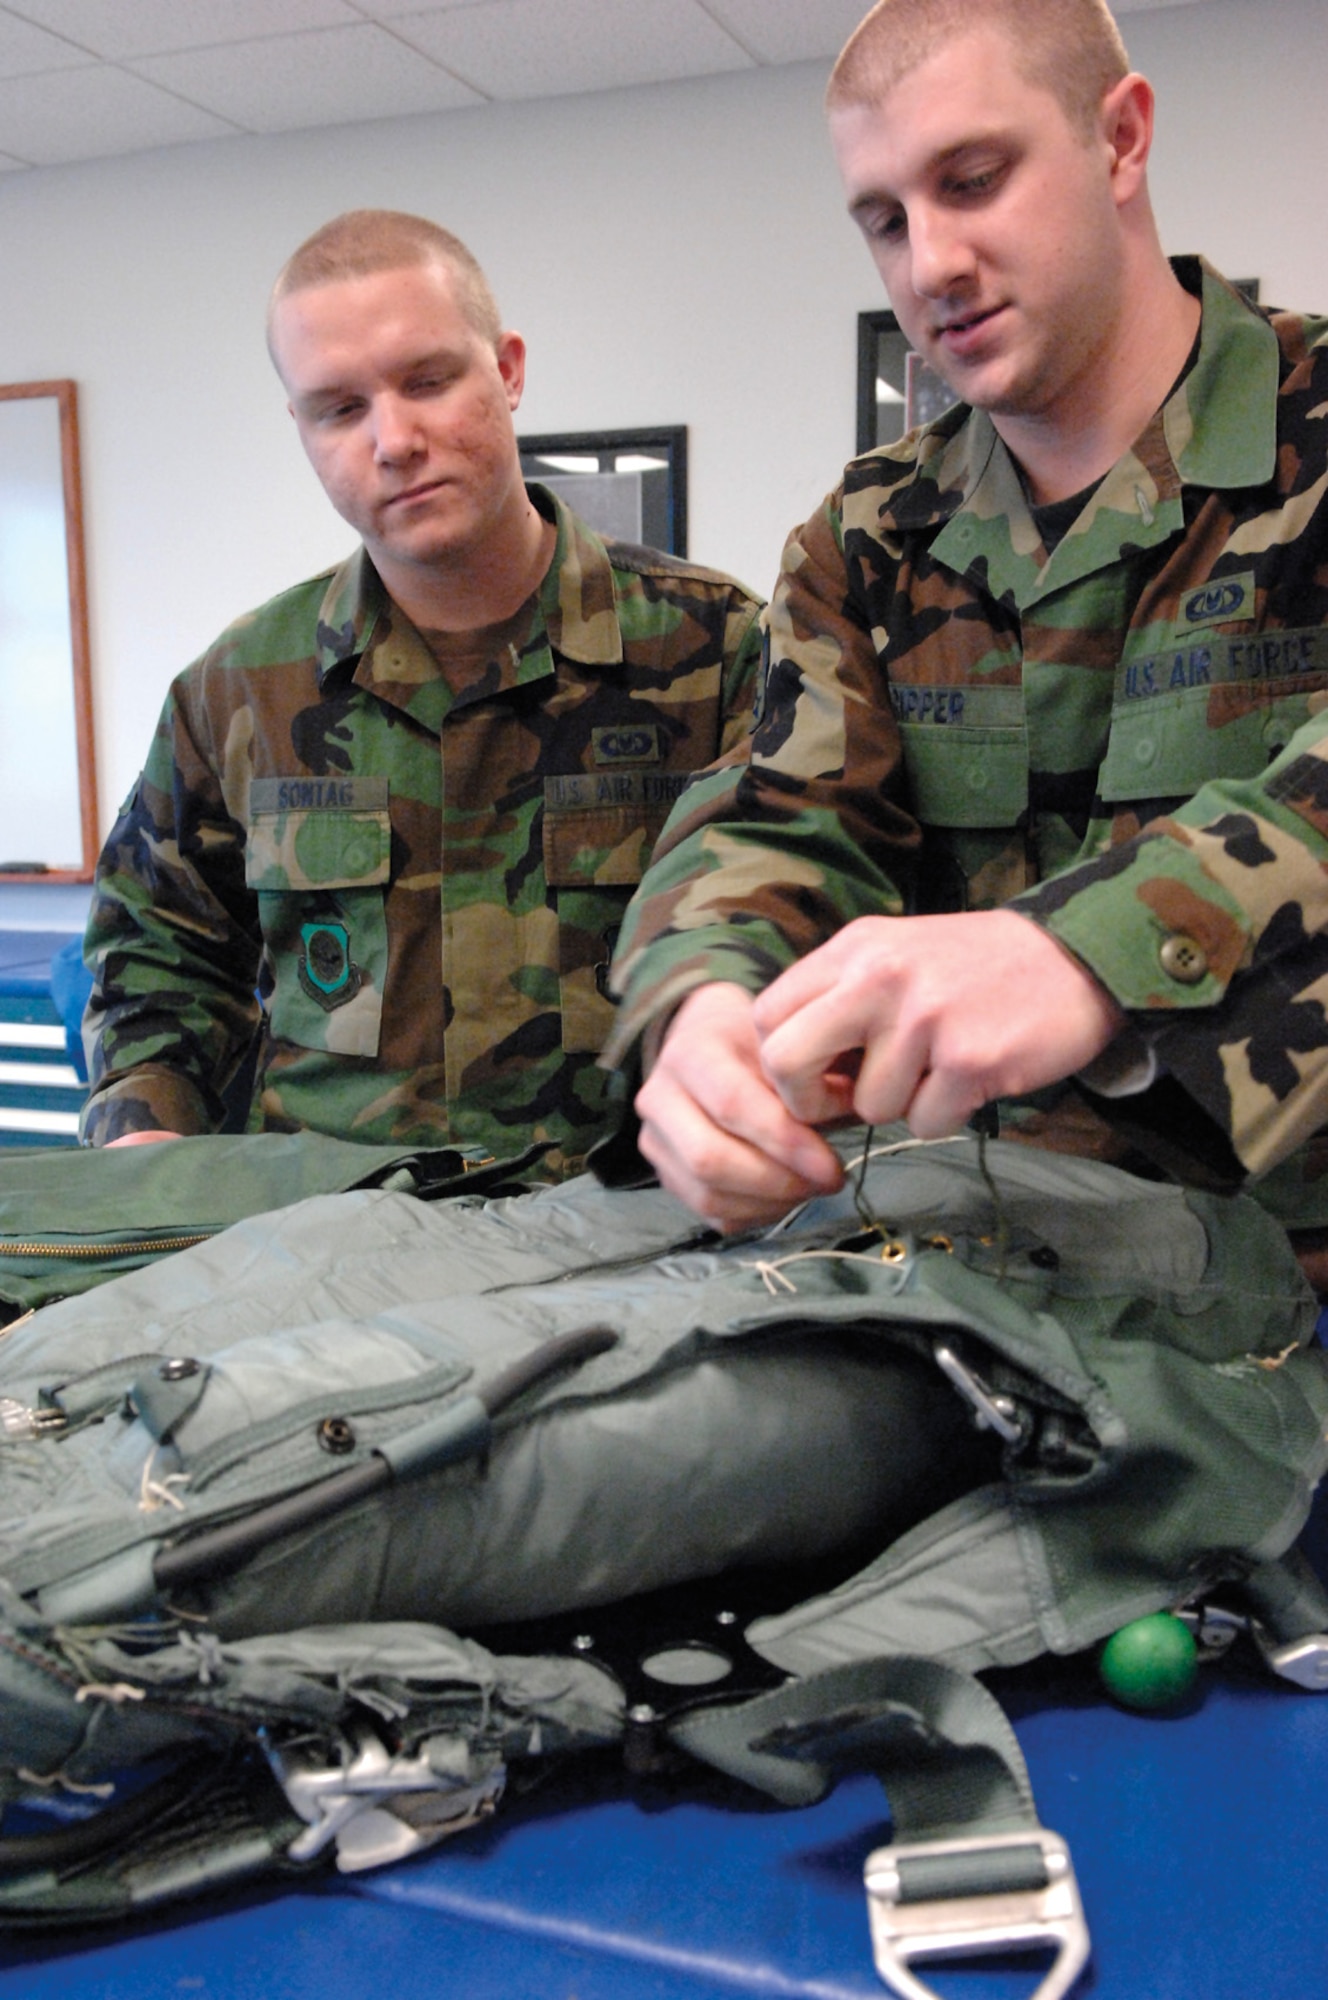 MCCHORD AIR FORCE BASE, Wash. -- Airmen Steven Sontag, left, and Joseph Ripper, both from the 62nd Operations Support Squadron, inspect a parachute  April 16, 2007 in the aircrew life support section warehouse prior to clearing it for pre-positioning aboard an aircraft. (U.S. Air Force photo/Abner Guzman)